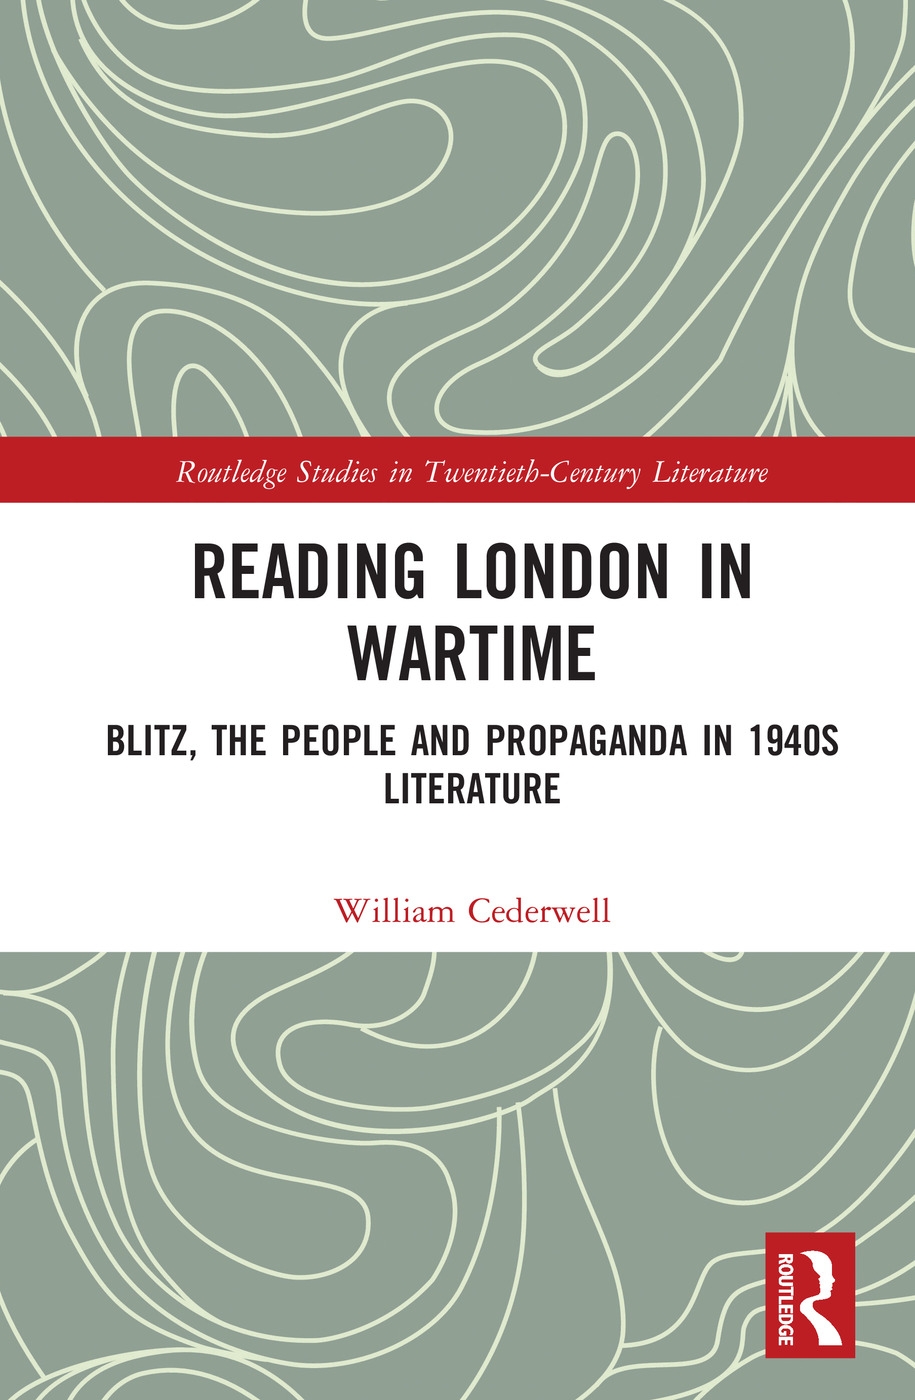 Reading London in Wartime: Blitz, the People and Propaganda in 1940s Literature